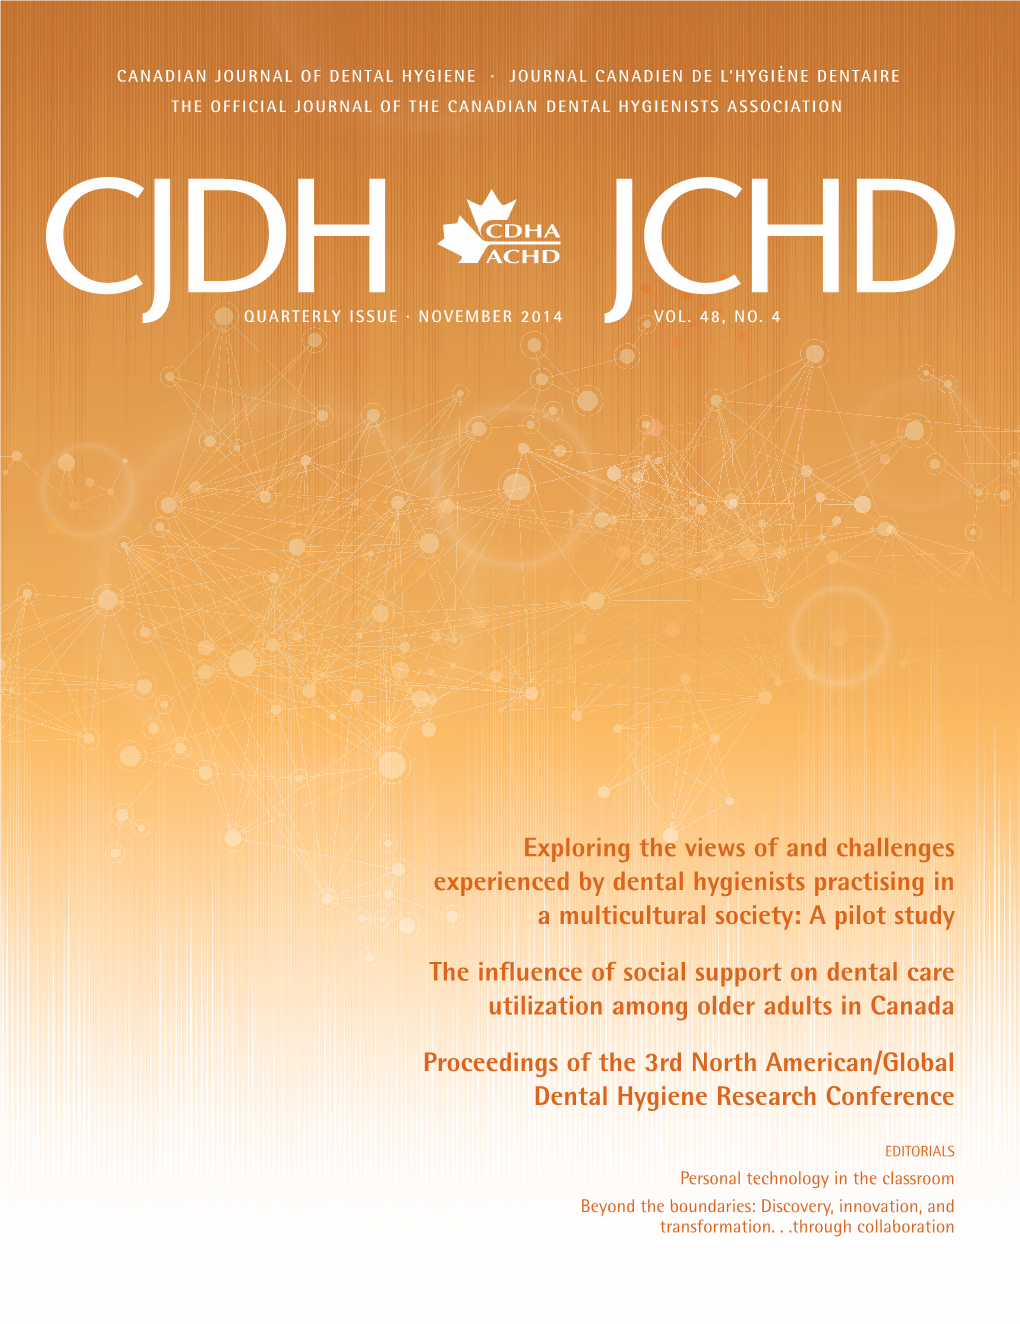 Exploring the Views of and Challenges Experienced by Dental Hygienists Practising in a Multicultural Society: a Pilot Study